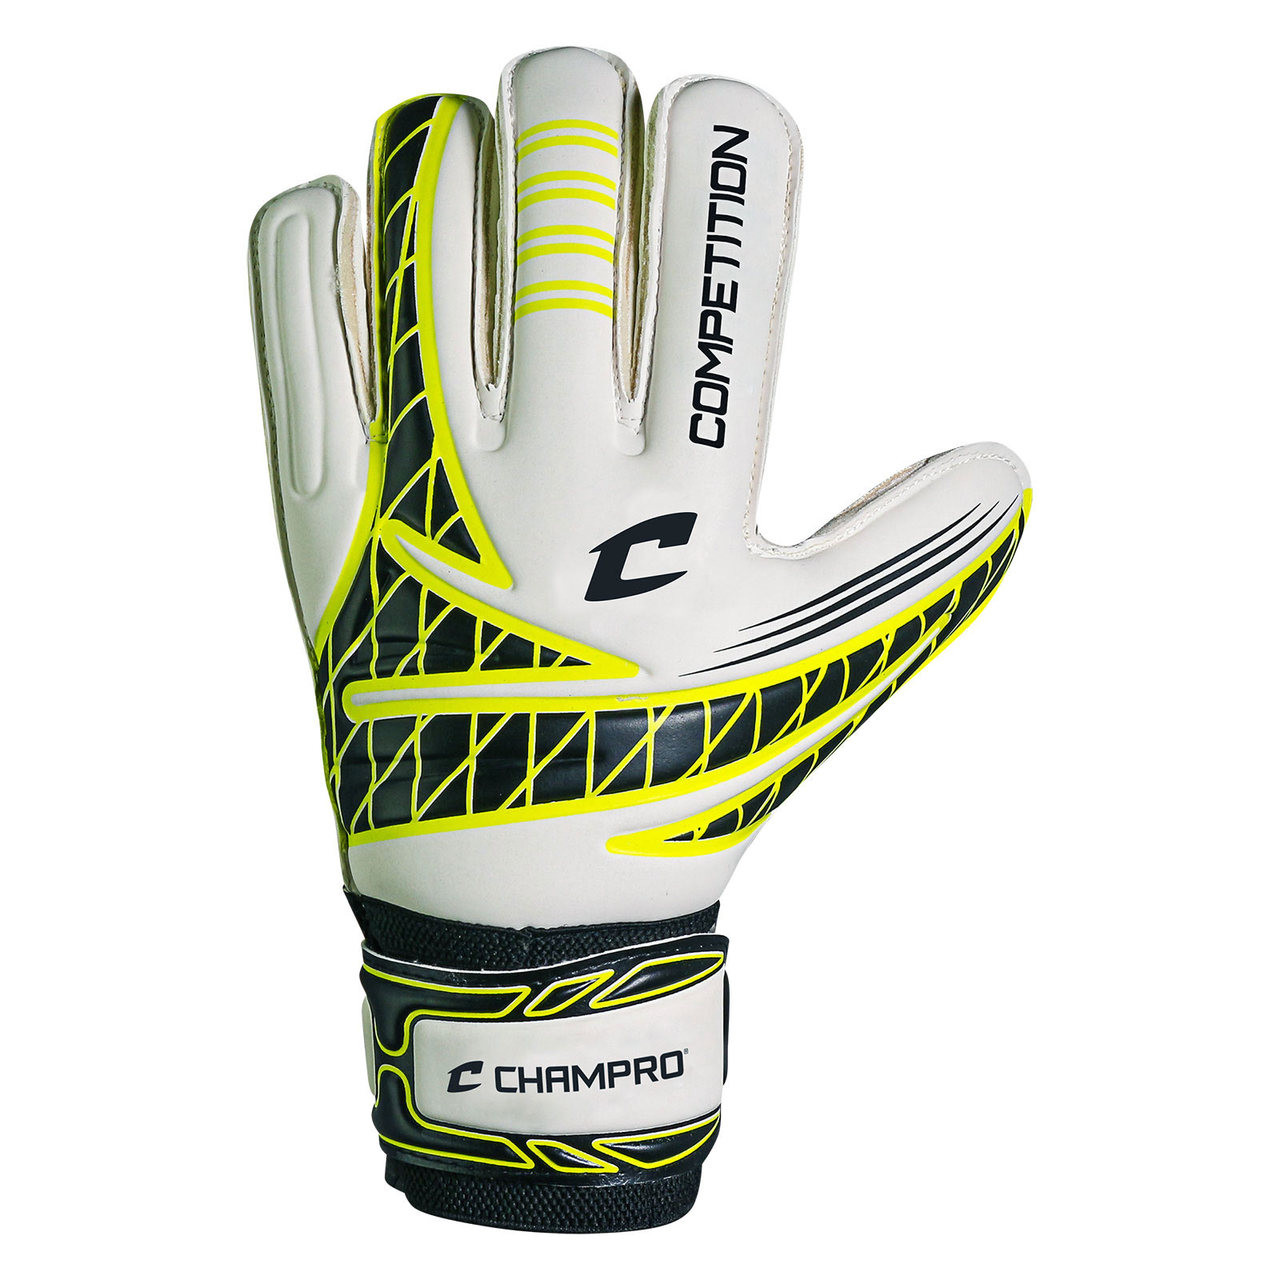 Champro Sports Competition Goalie Gloves - Athletic Stuff